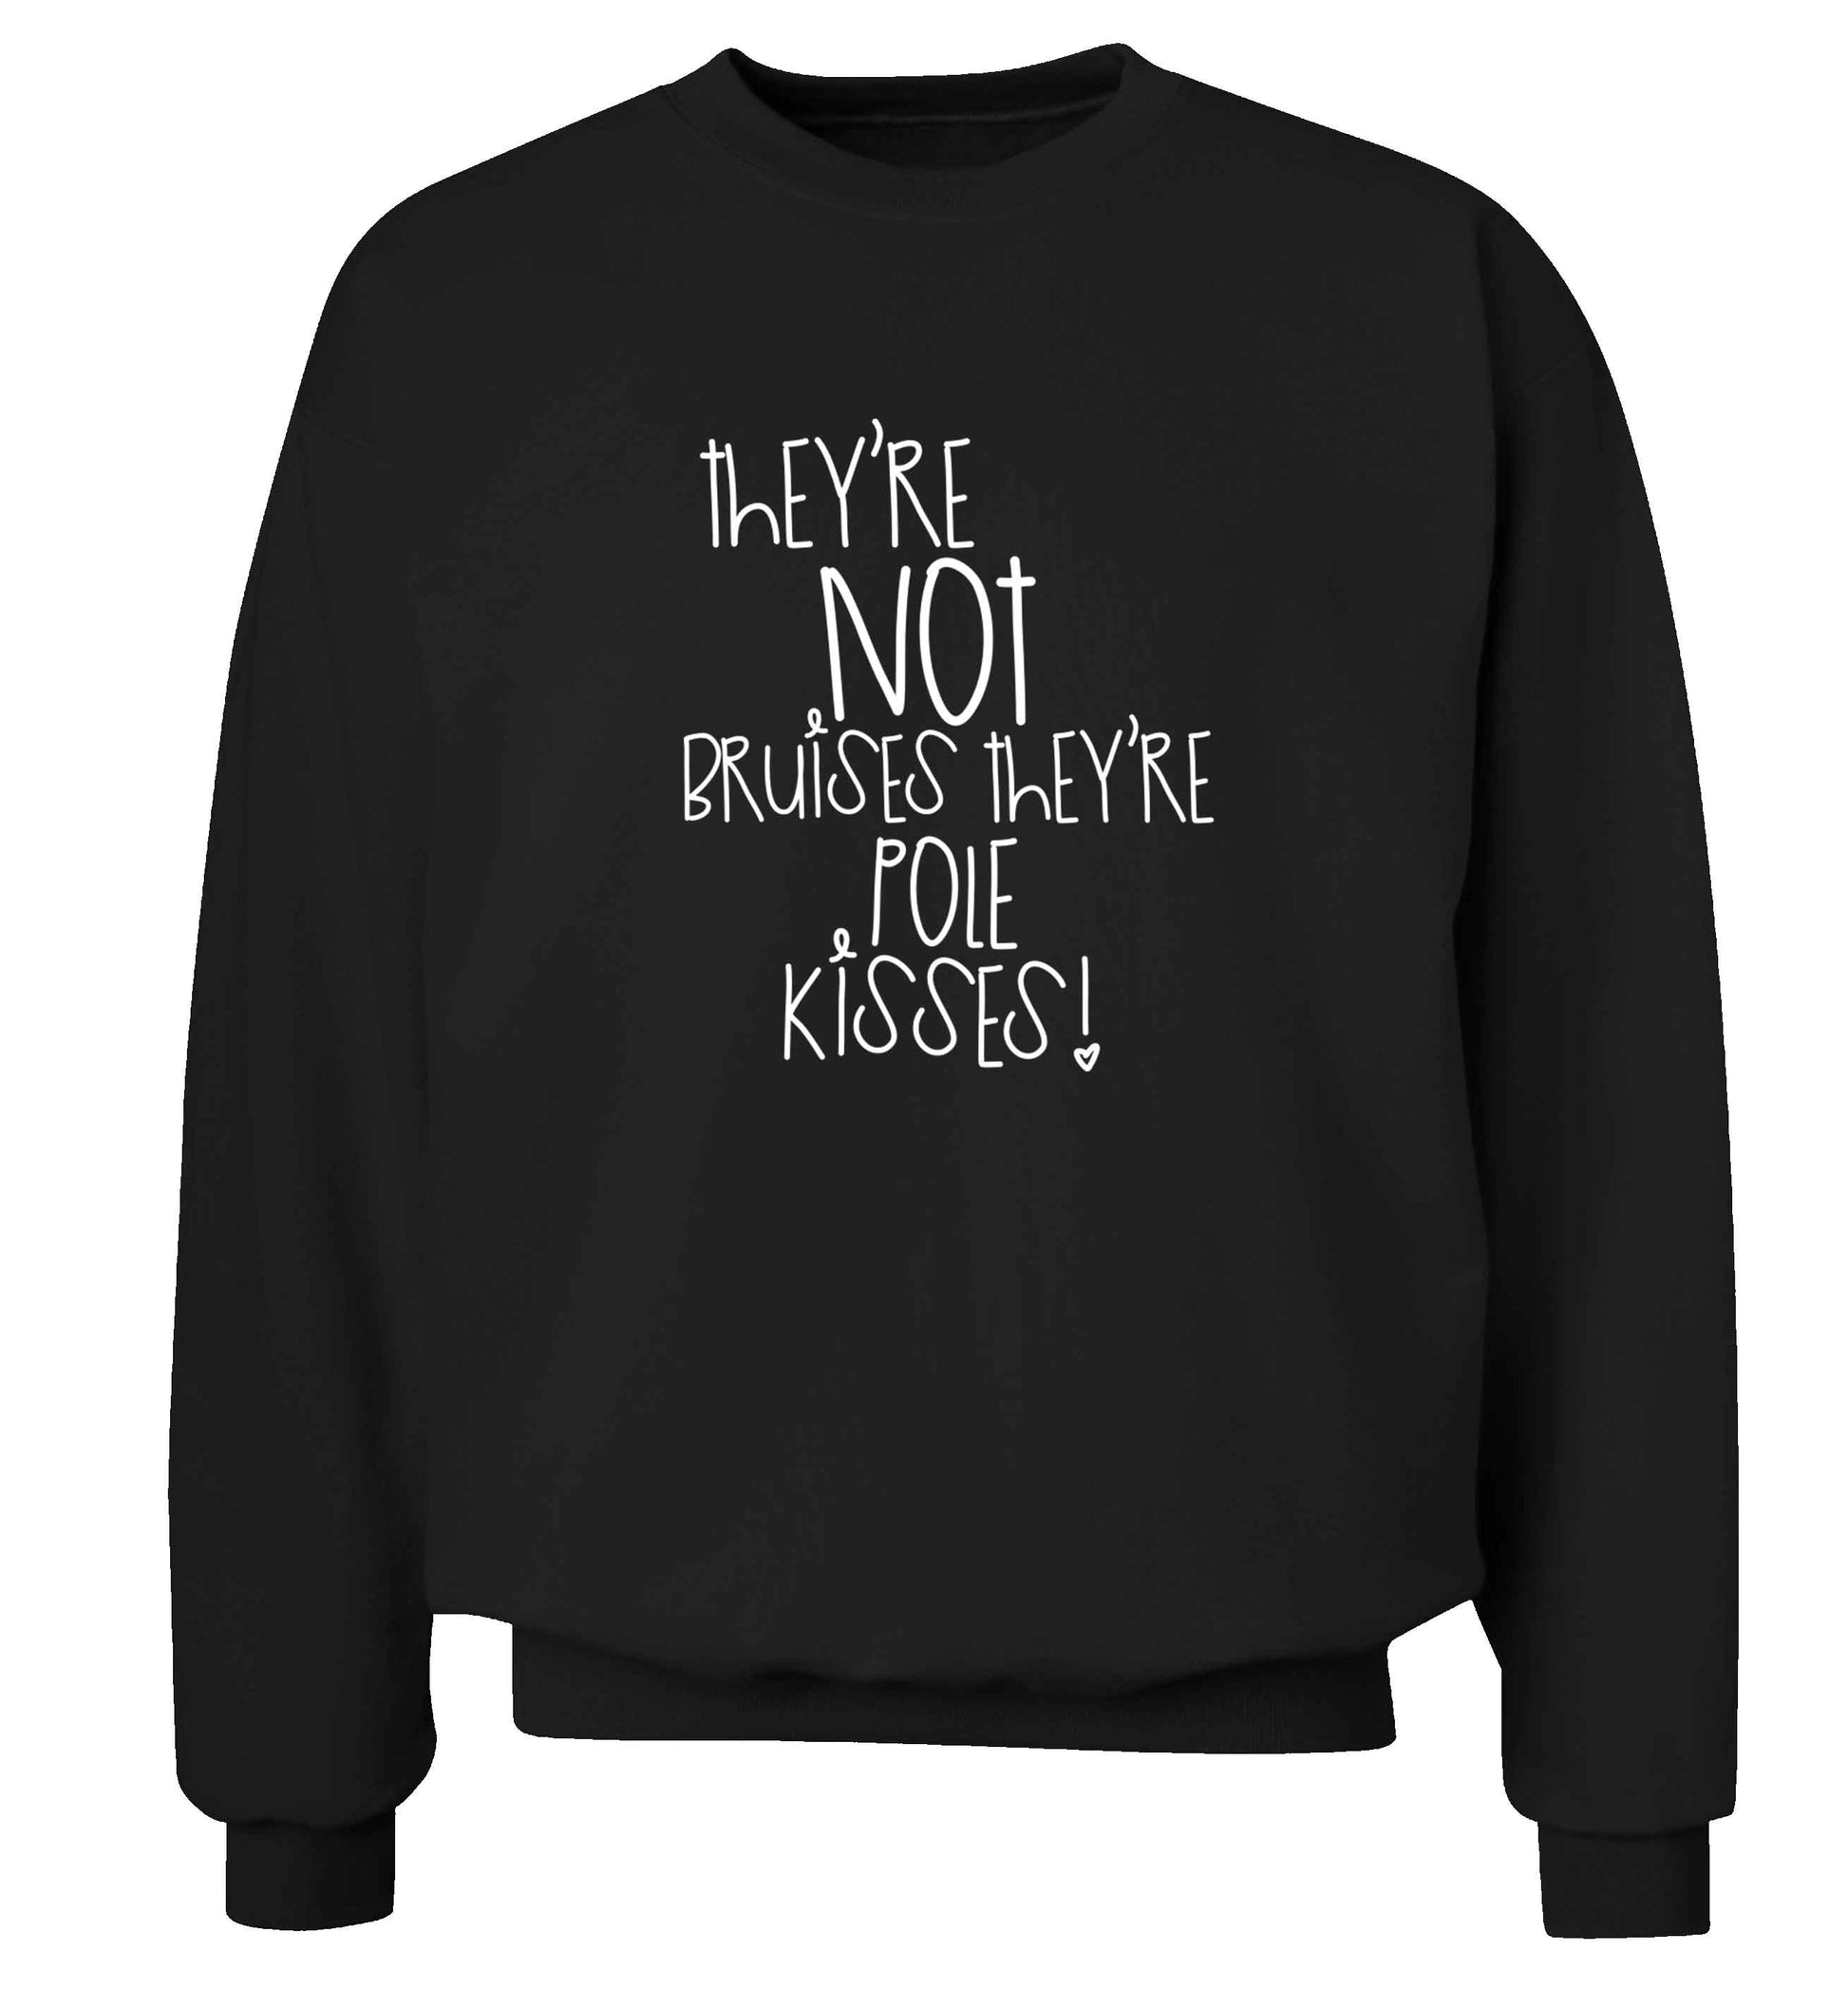 They're not bruises they're pole kisses adult's unisex black sweater 2XL